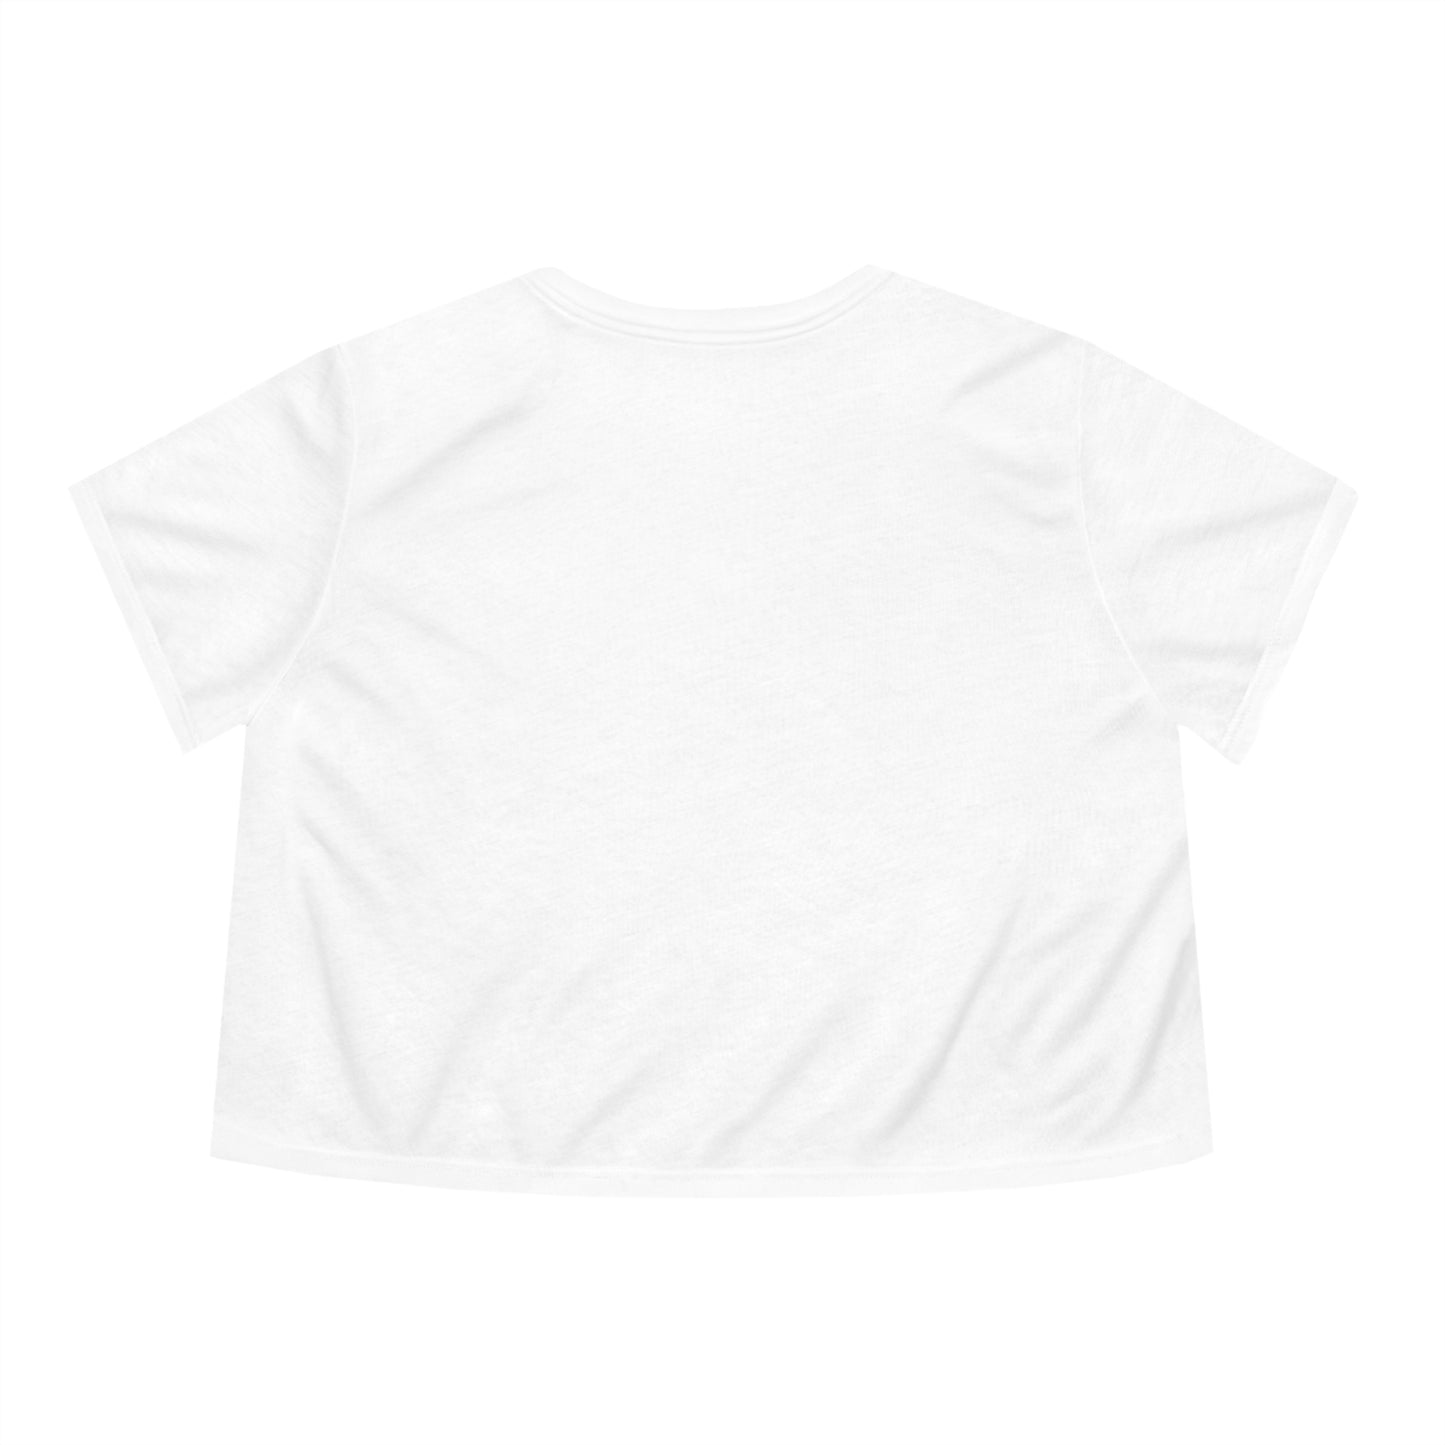 City Circle Women's Flowy Cropped Tee